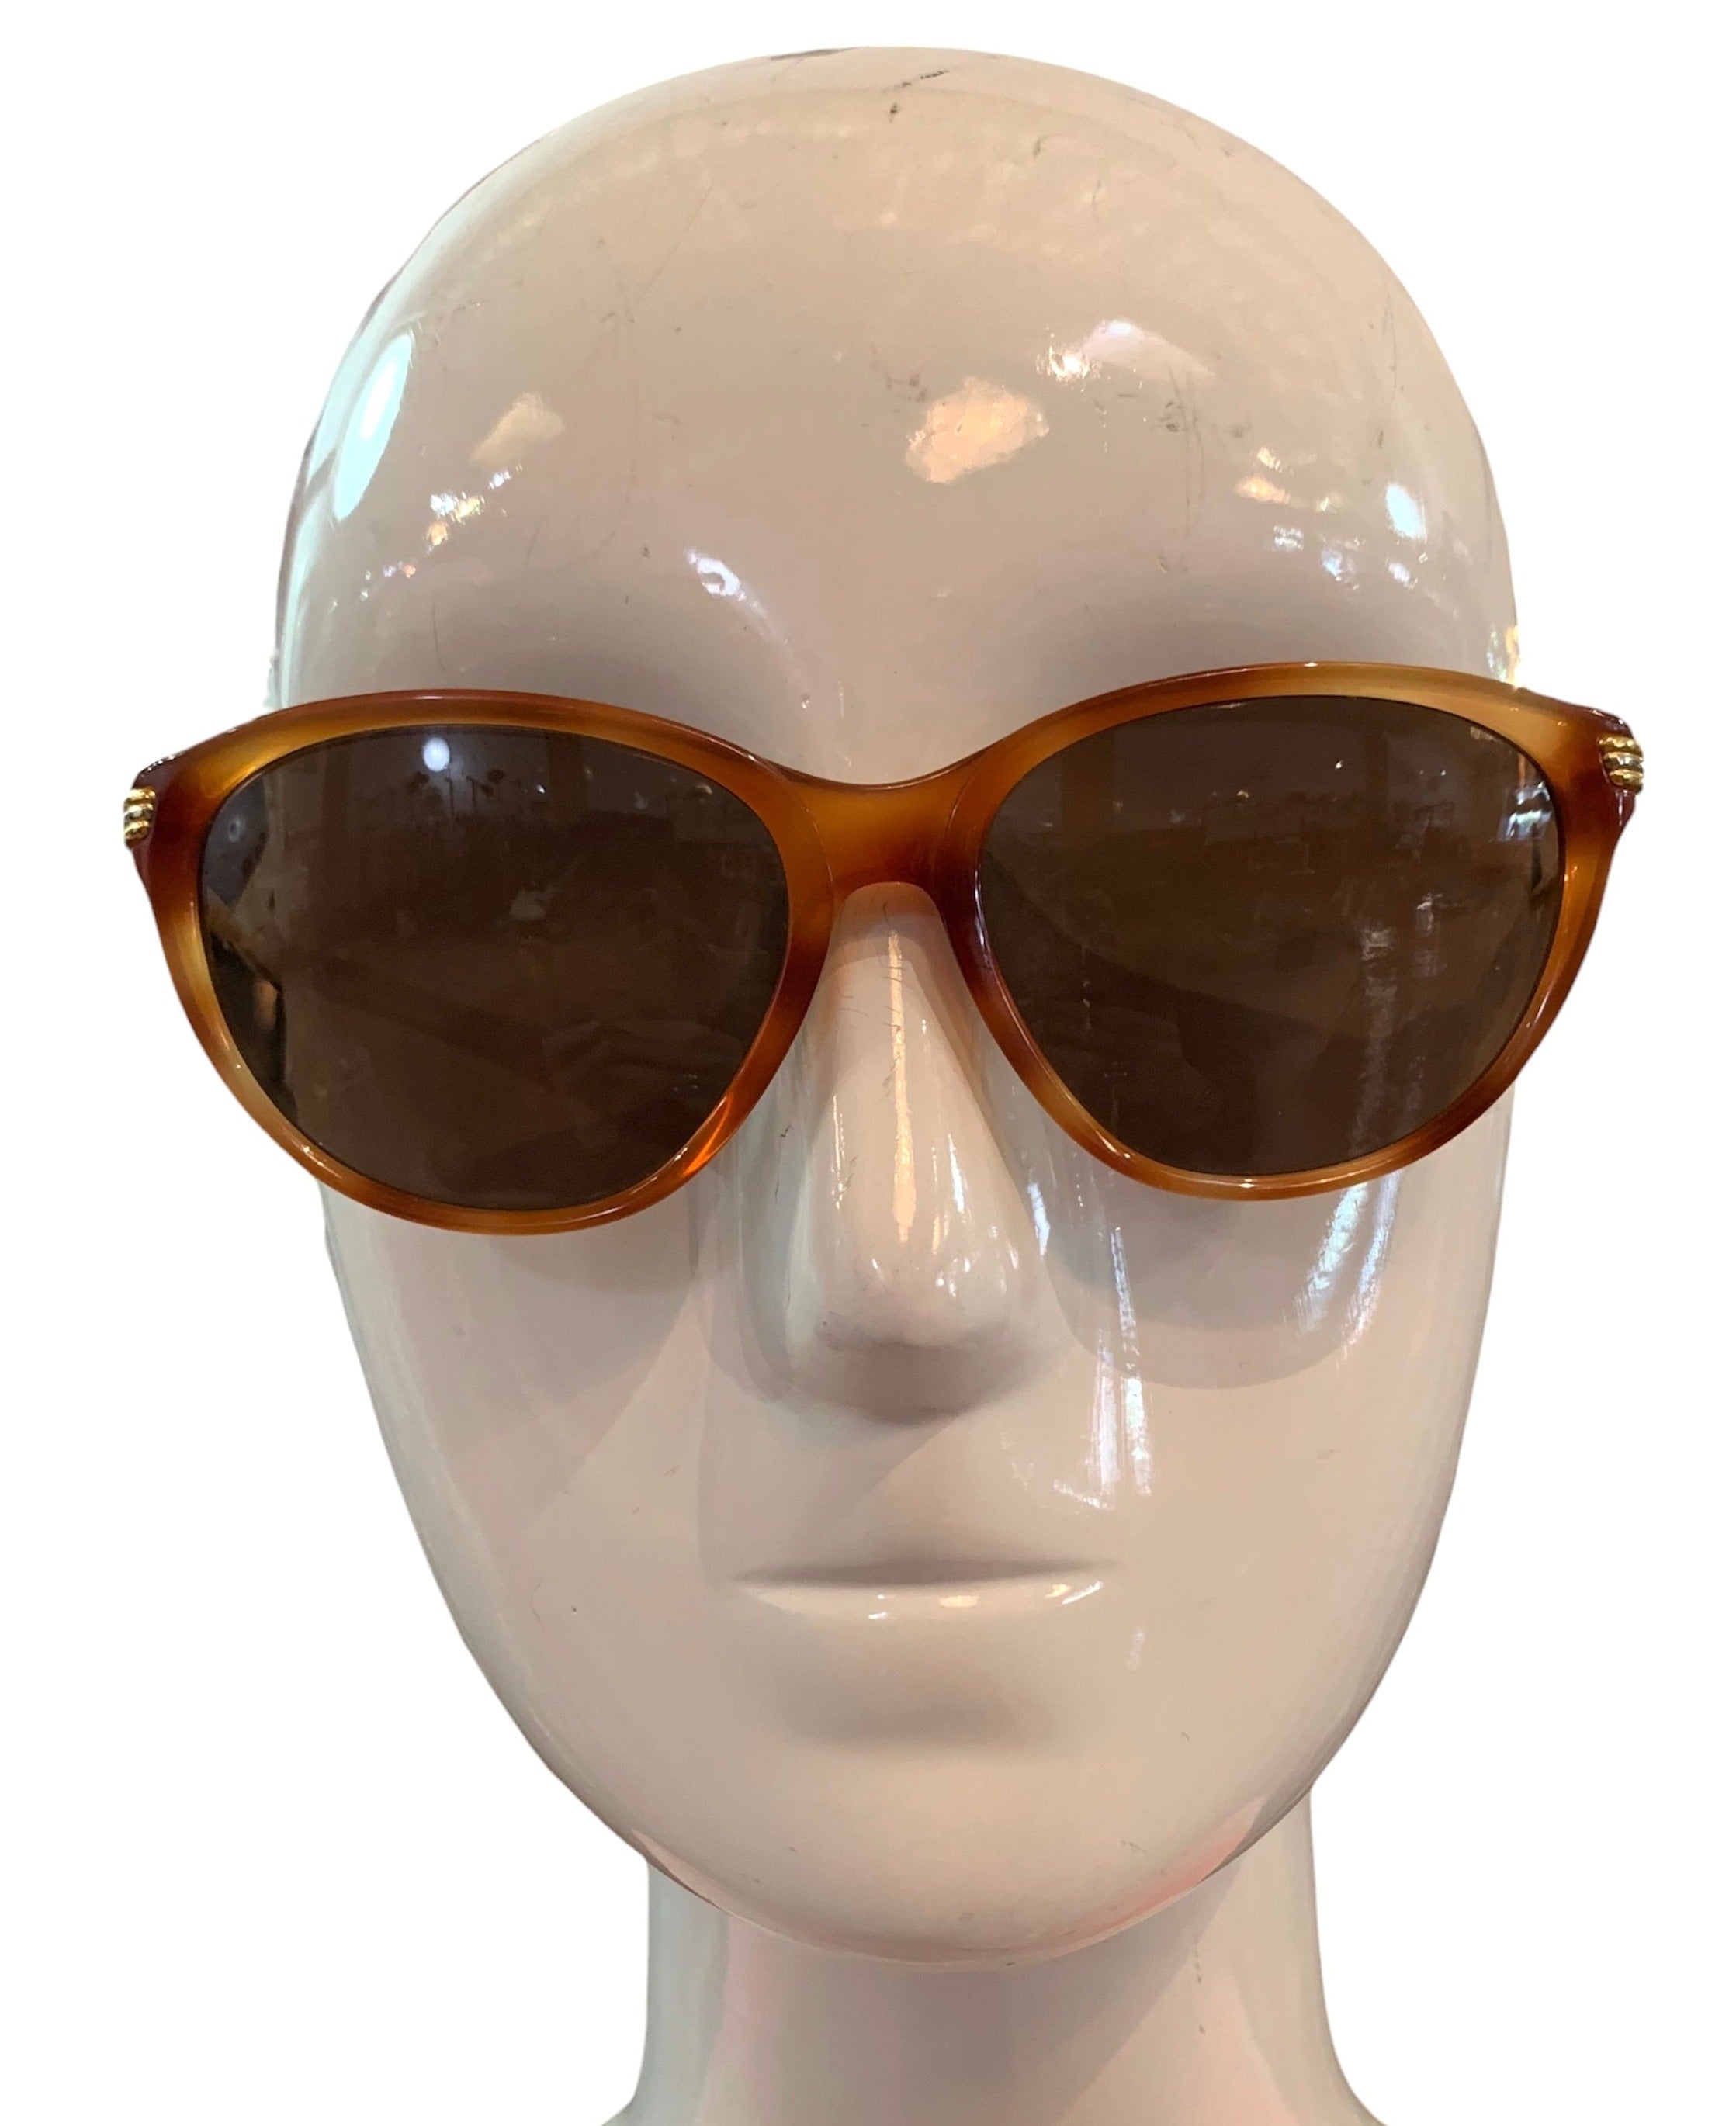   Cartier  90s Gold Plated Tortoiseshell Sunglasses  FRONT 2 of 6